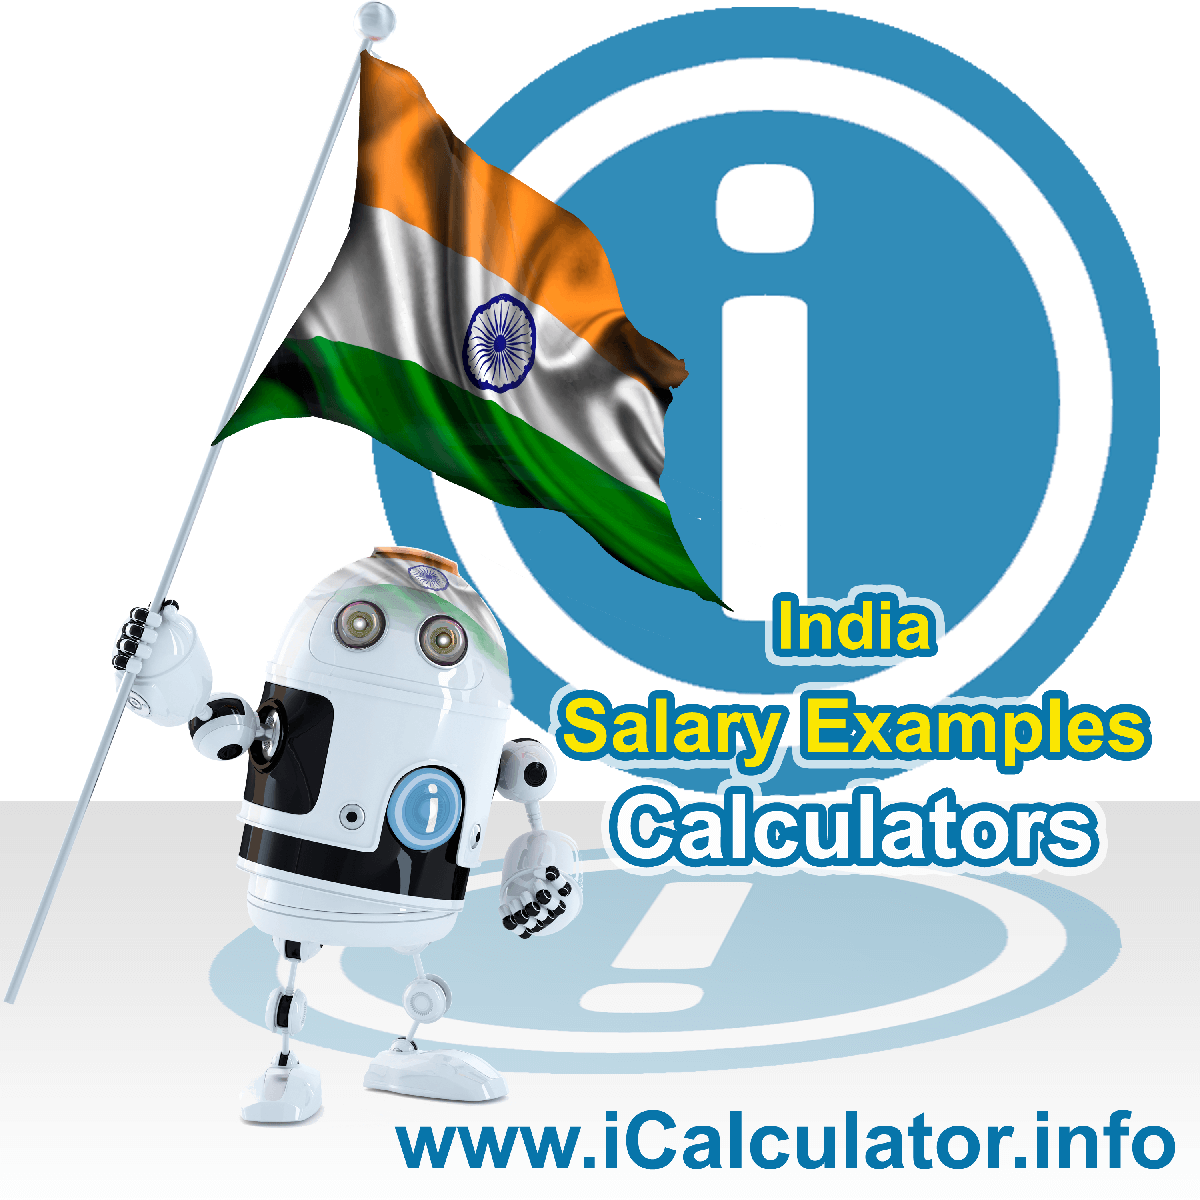 India Income Tax Example for ₹ 11,499.00 Salary. This image shows the flag of India and information relating to the tax formula for the India Income Tax Calculator used to create this payroll example for India